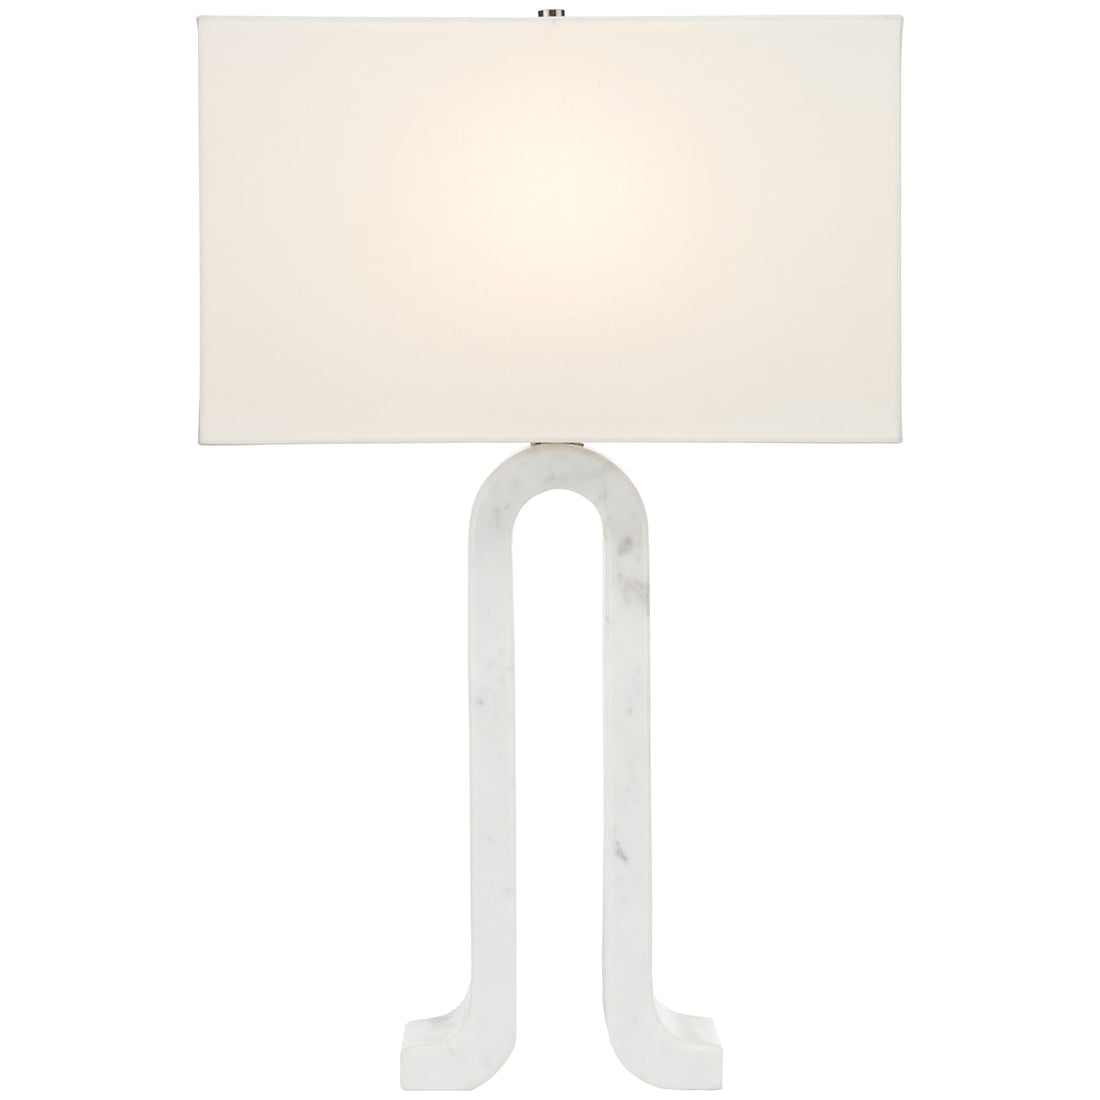 Currey and Company Leo Table Lamp